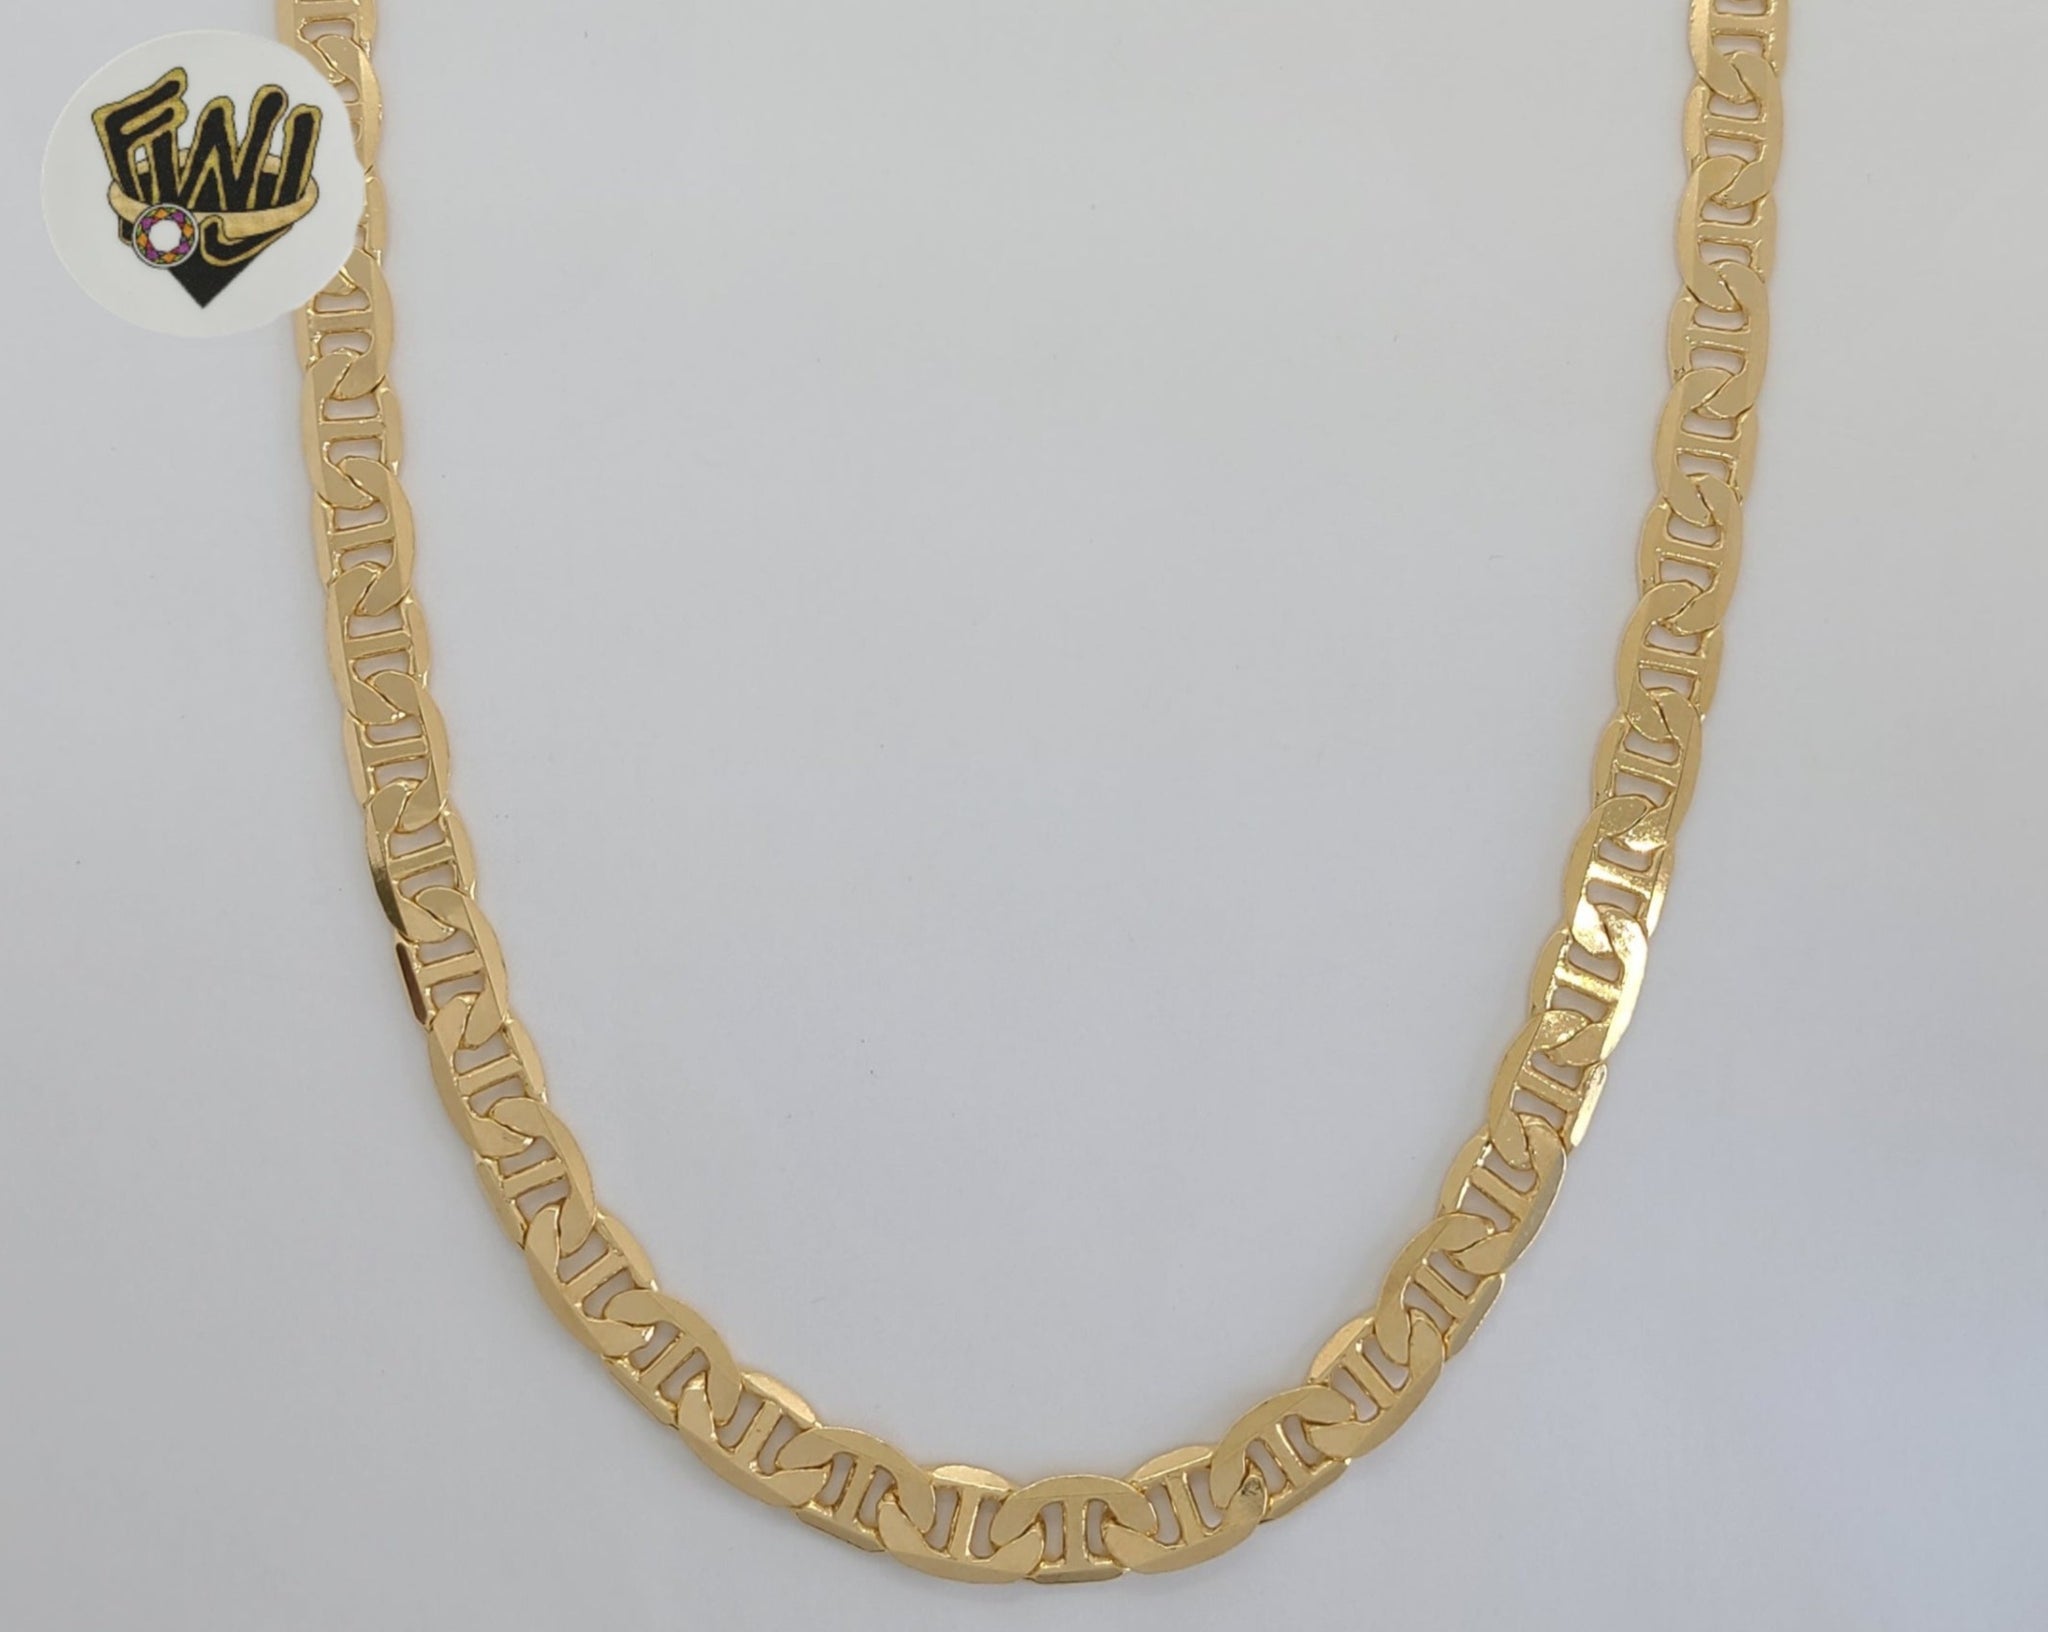 Men's Chainmariner Link Chain Gold Filled Necklace Mens 